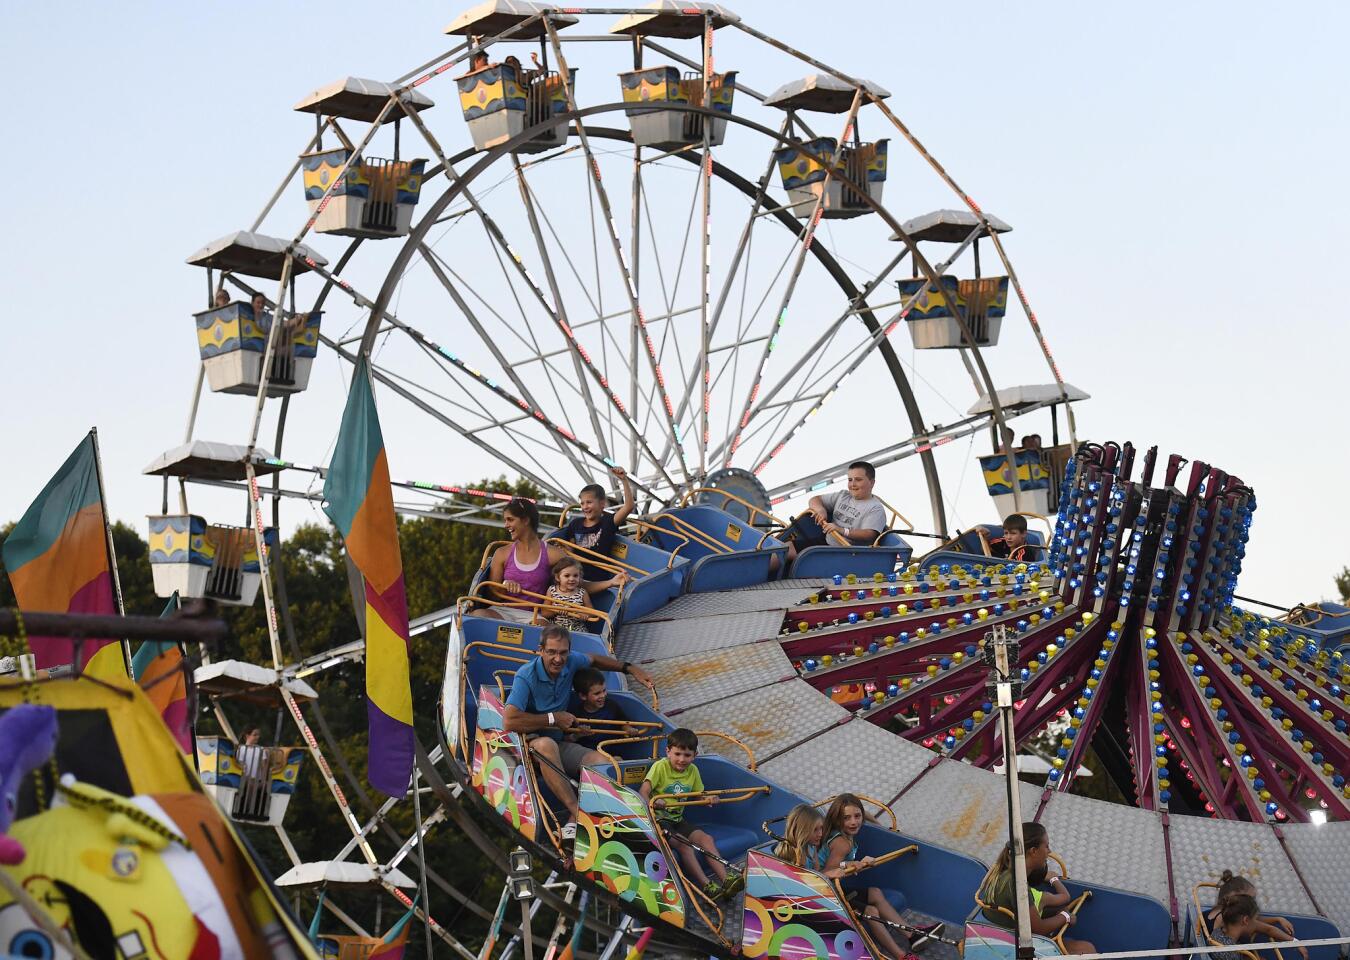 Carnival-goers enjoy the rides at the Winfield fire company carnival Wednesday, July 10, 2019.